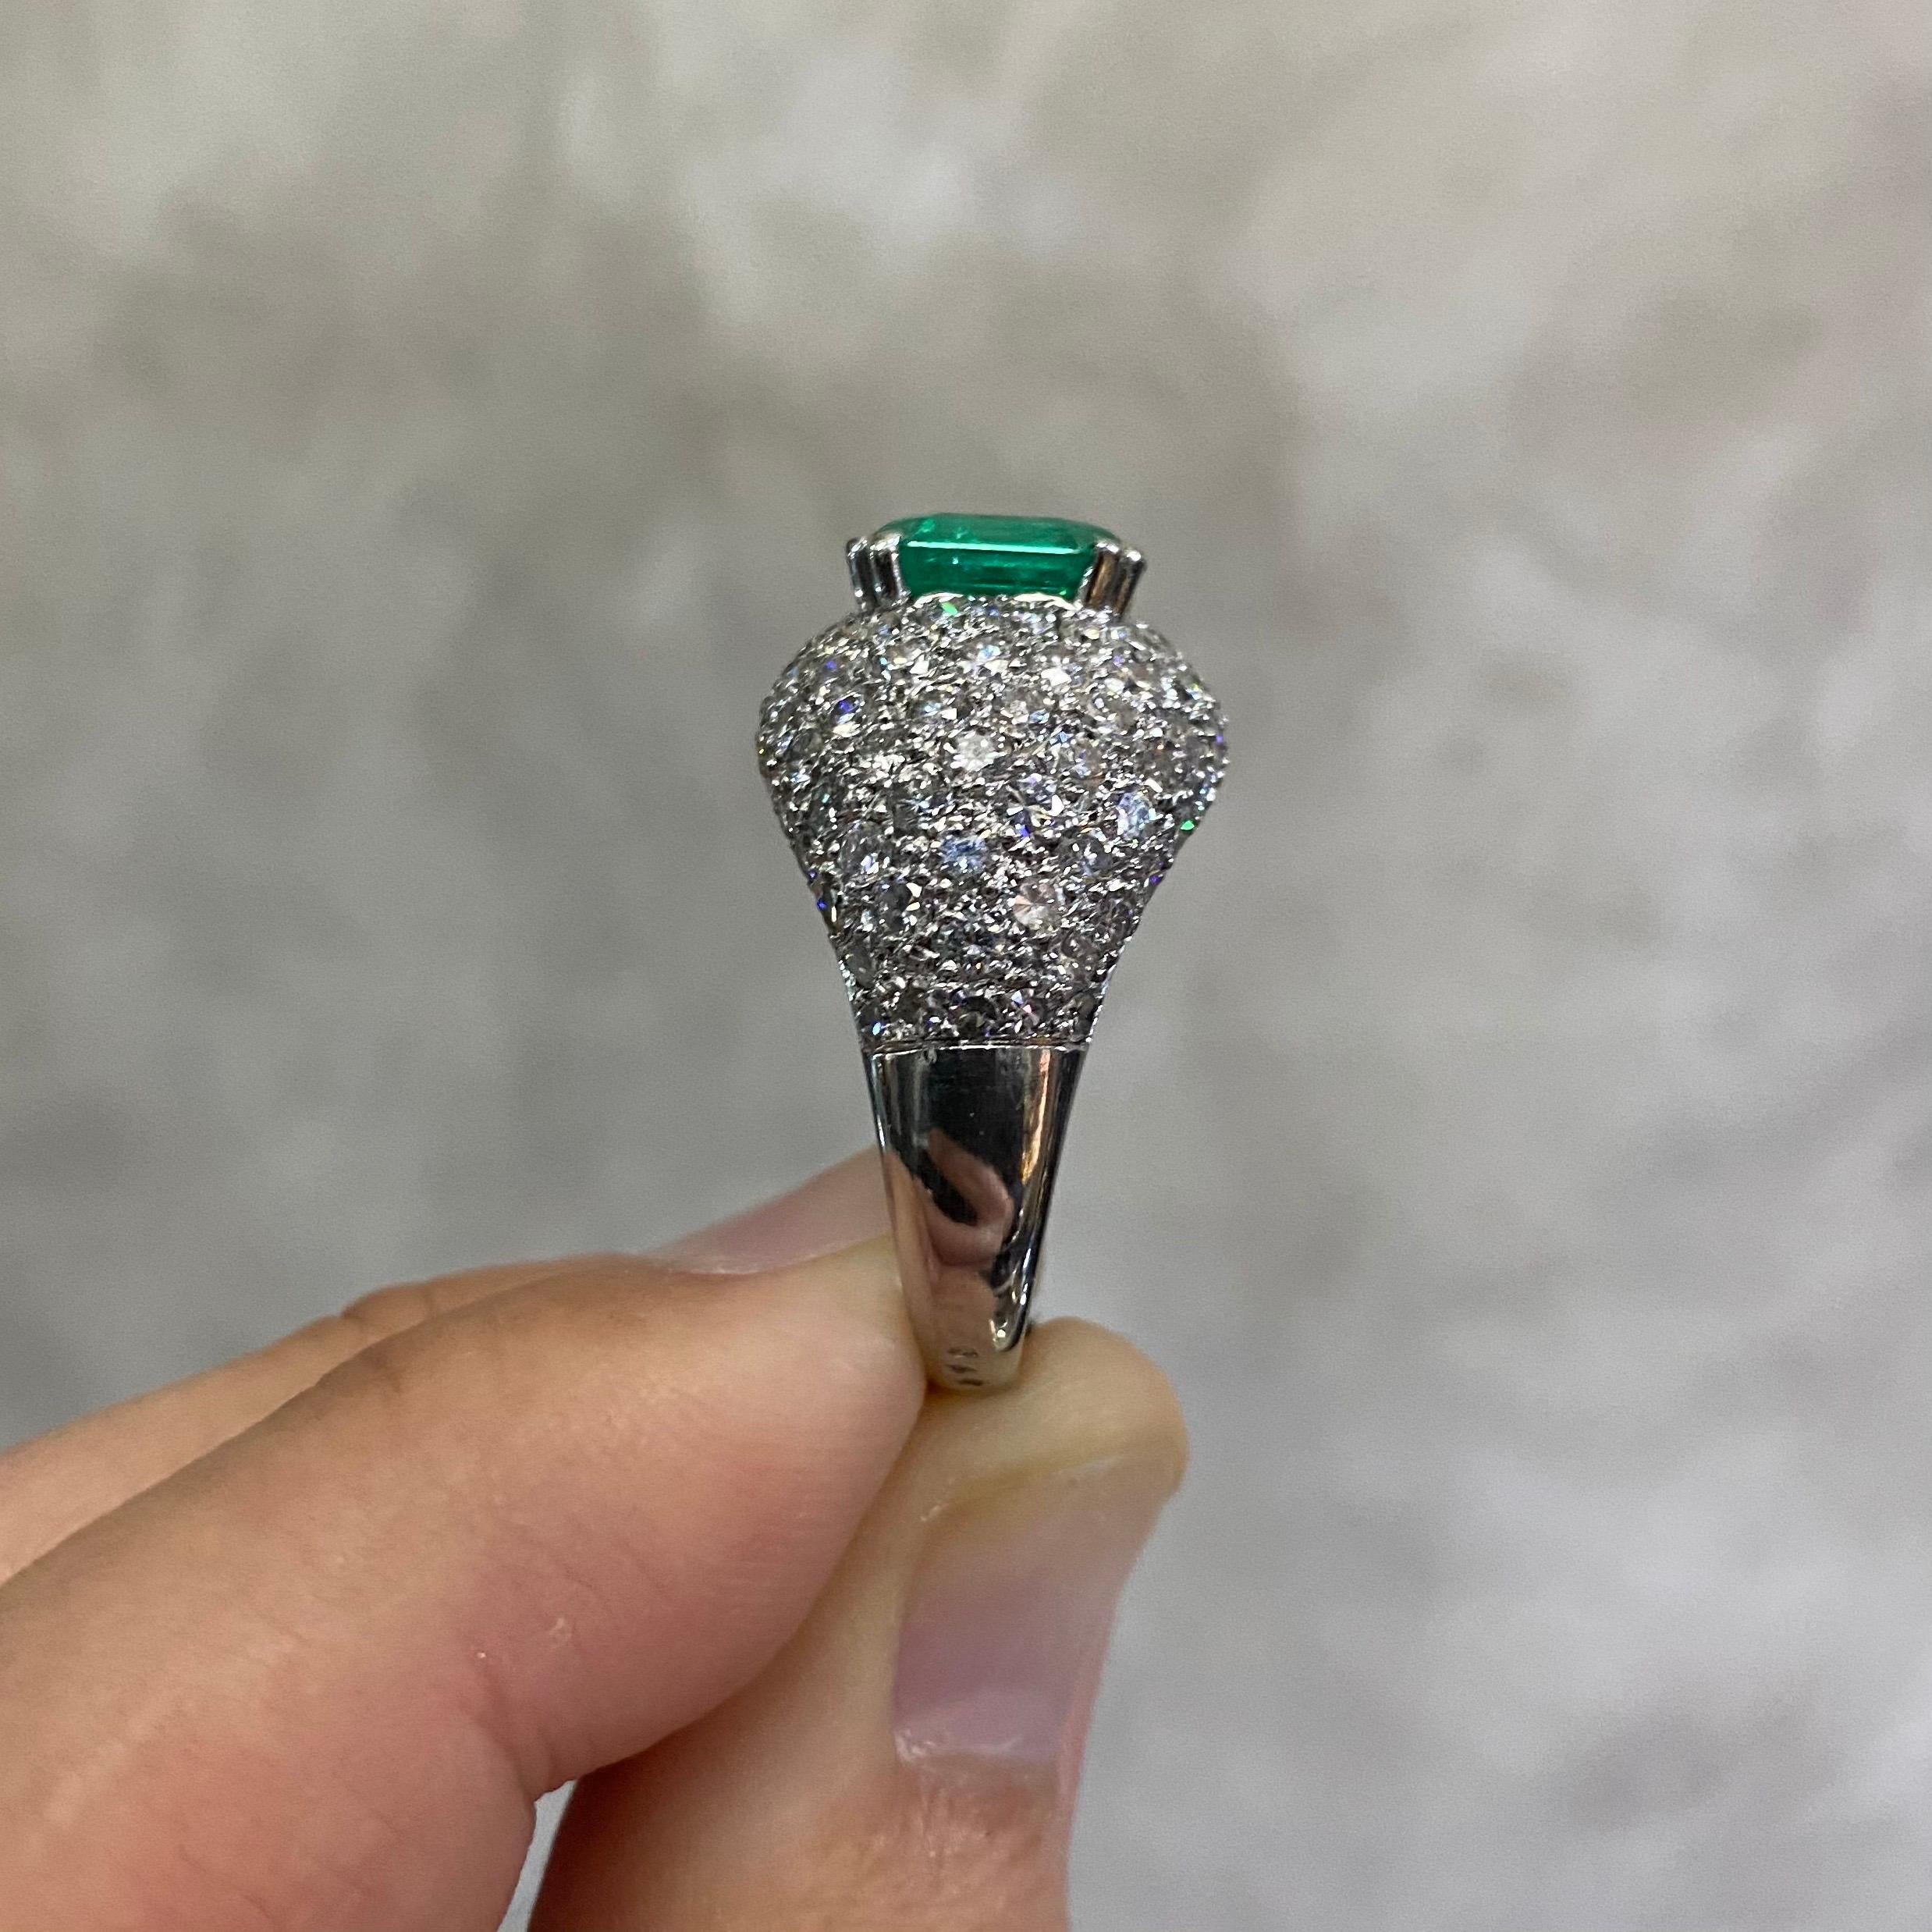 Vintage 1960s/1970s Colombian Emerald Diamond Bombe Cocktail Ring Platinum 6